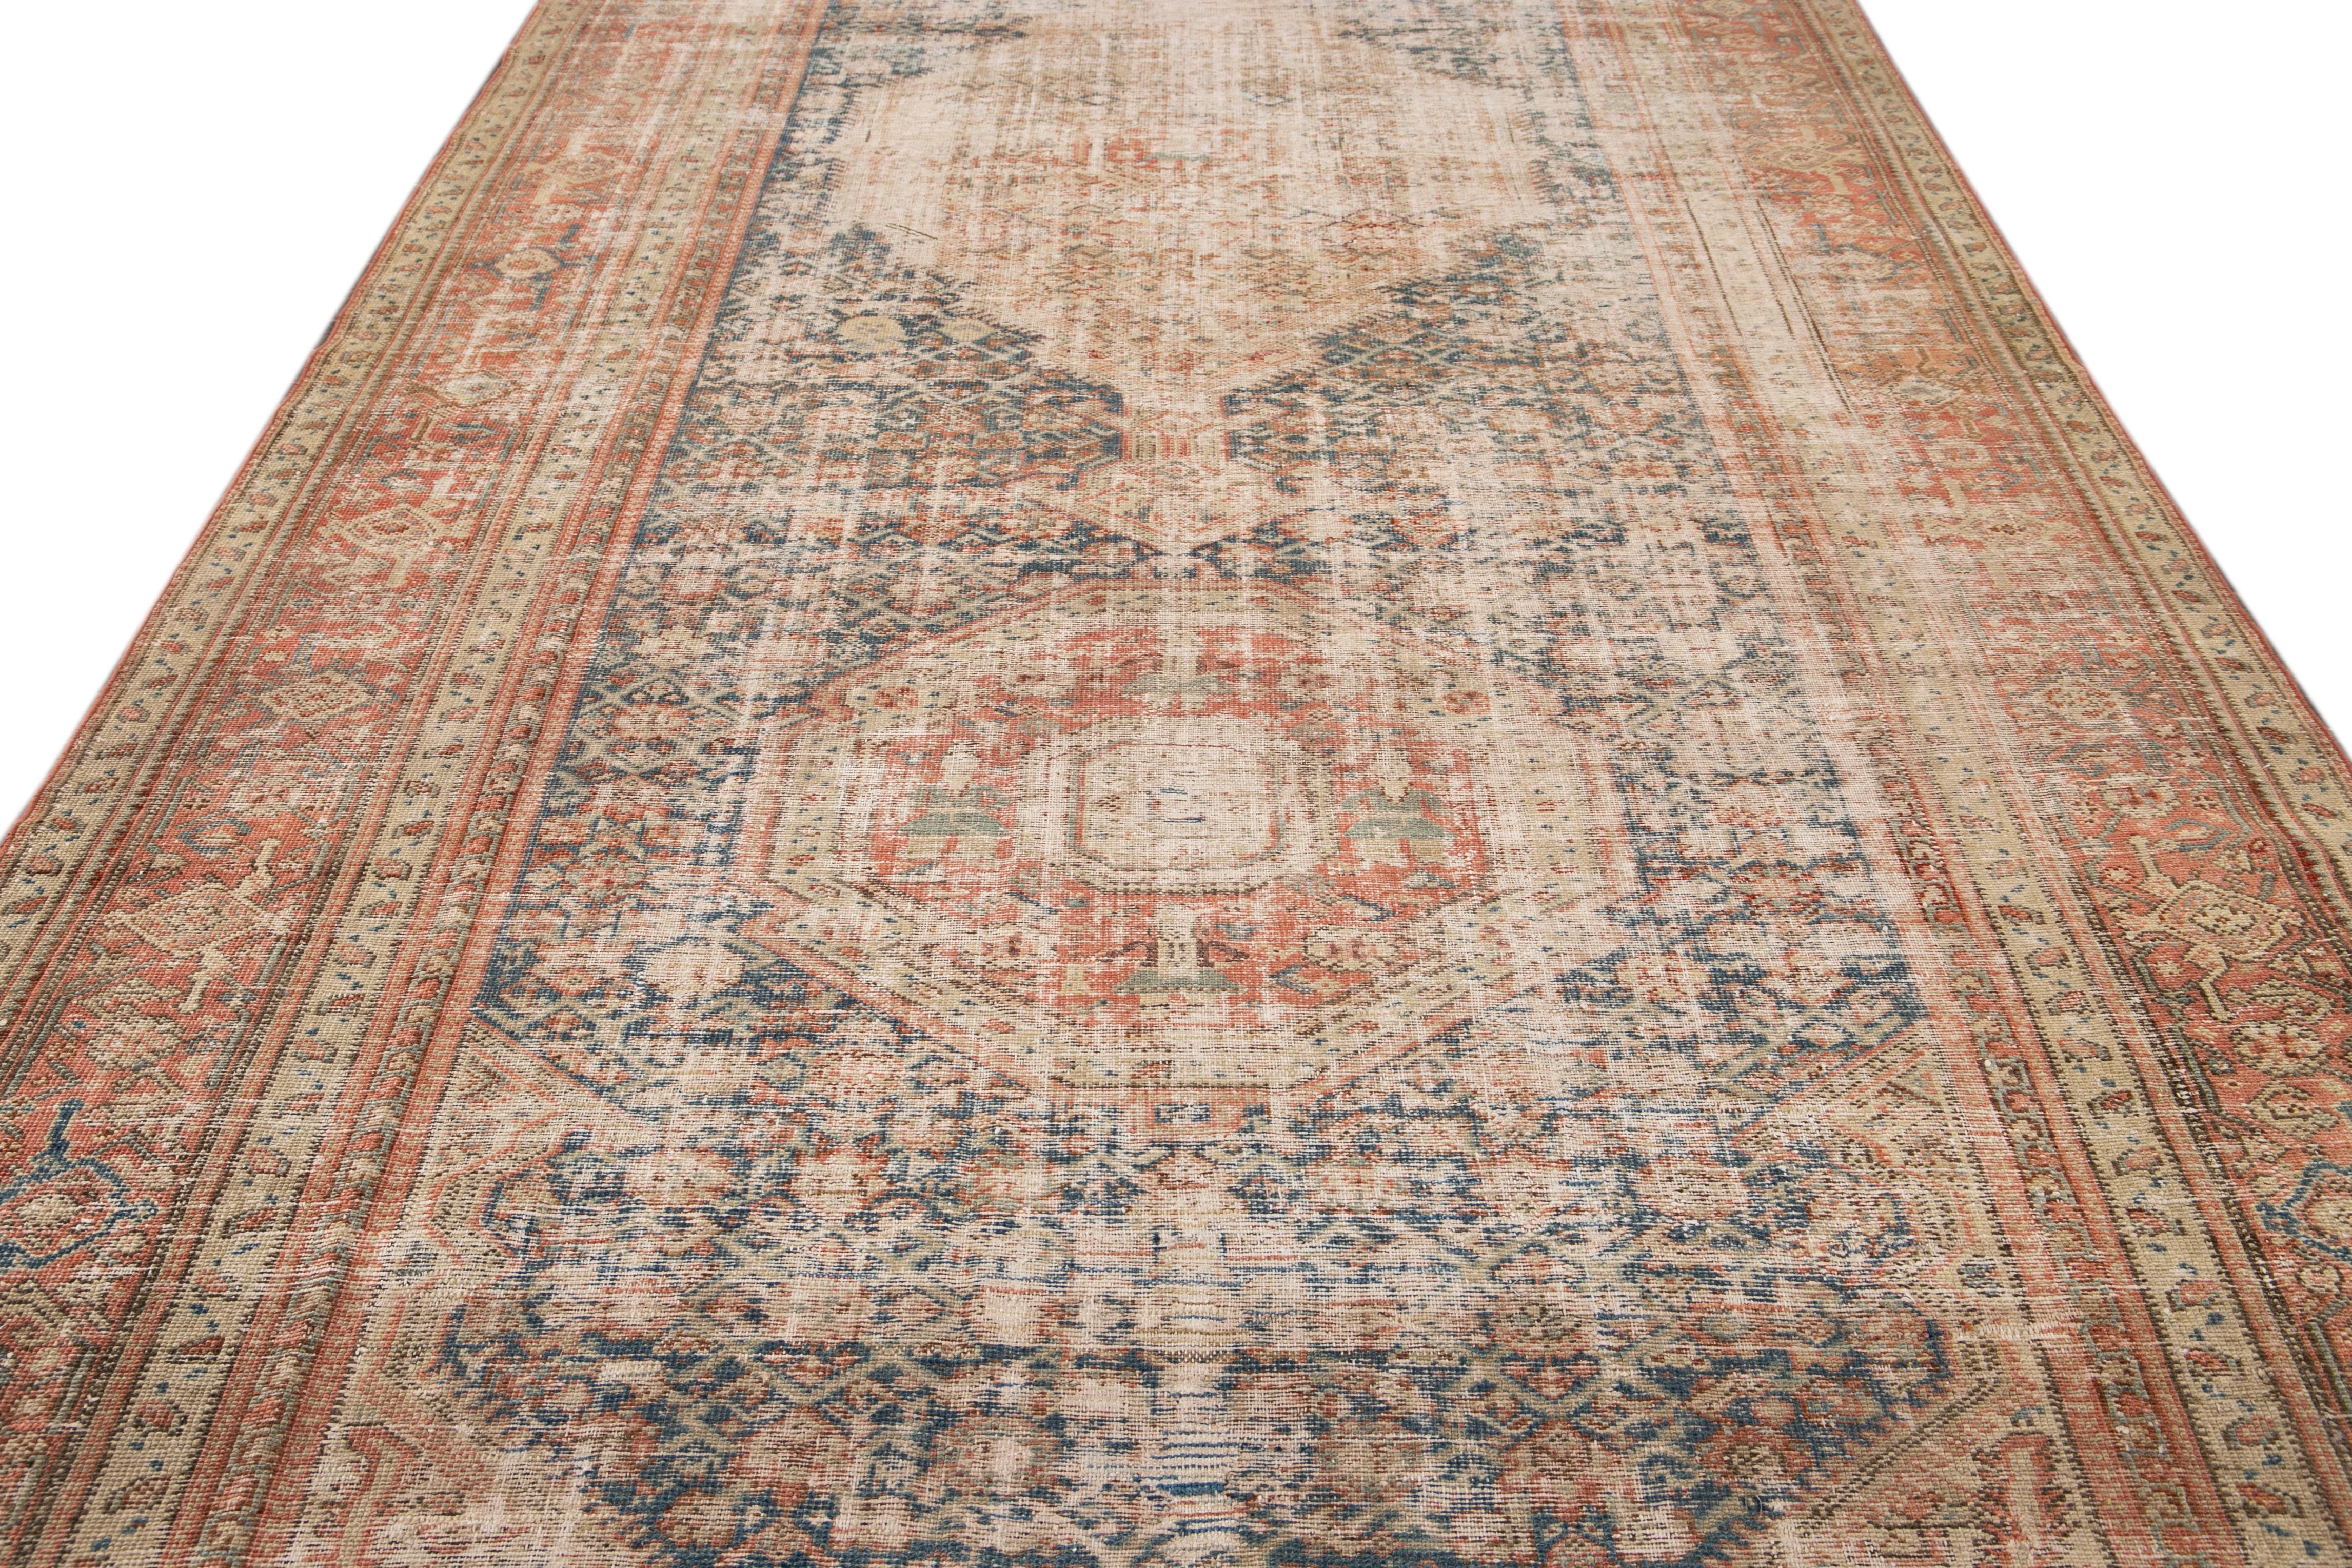 Beautiful vintage Persian Malayer hand knotted runner with a blue field, beige, and red accents in an all-over geometric motif design.

This rug measures: 7'3